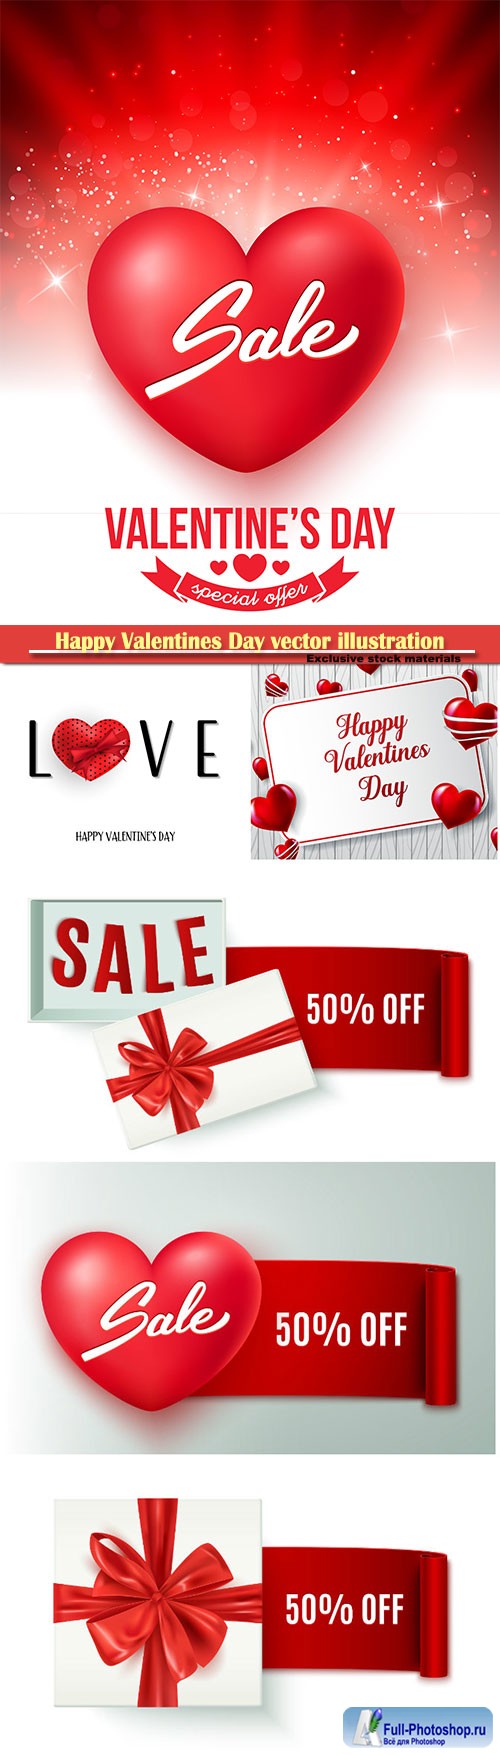 Happy Valentines Day vector illustration with love icon set